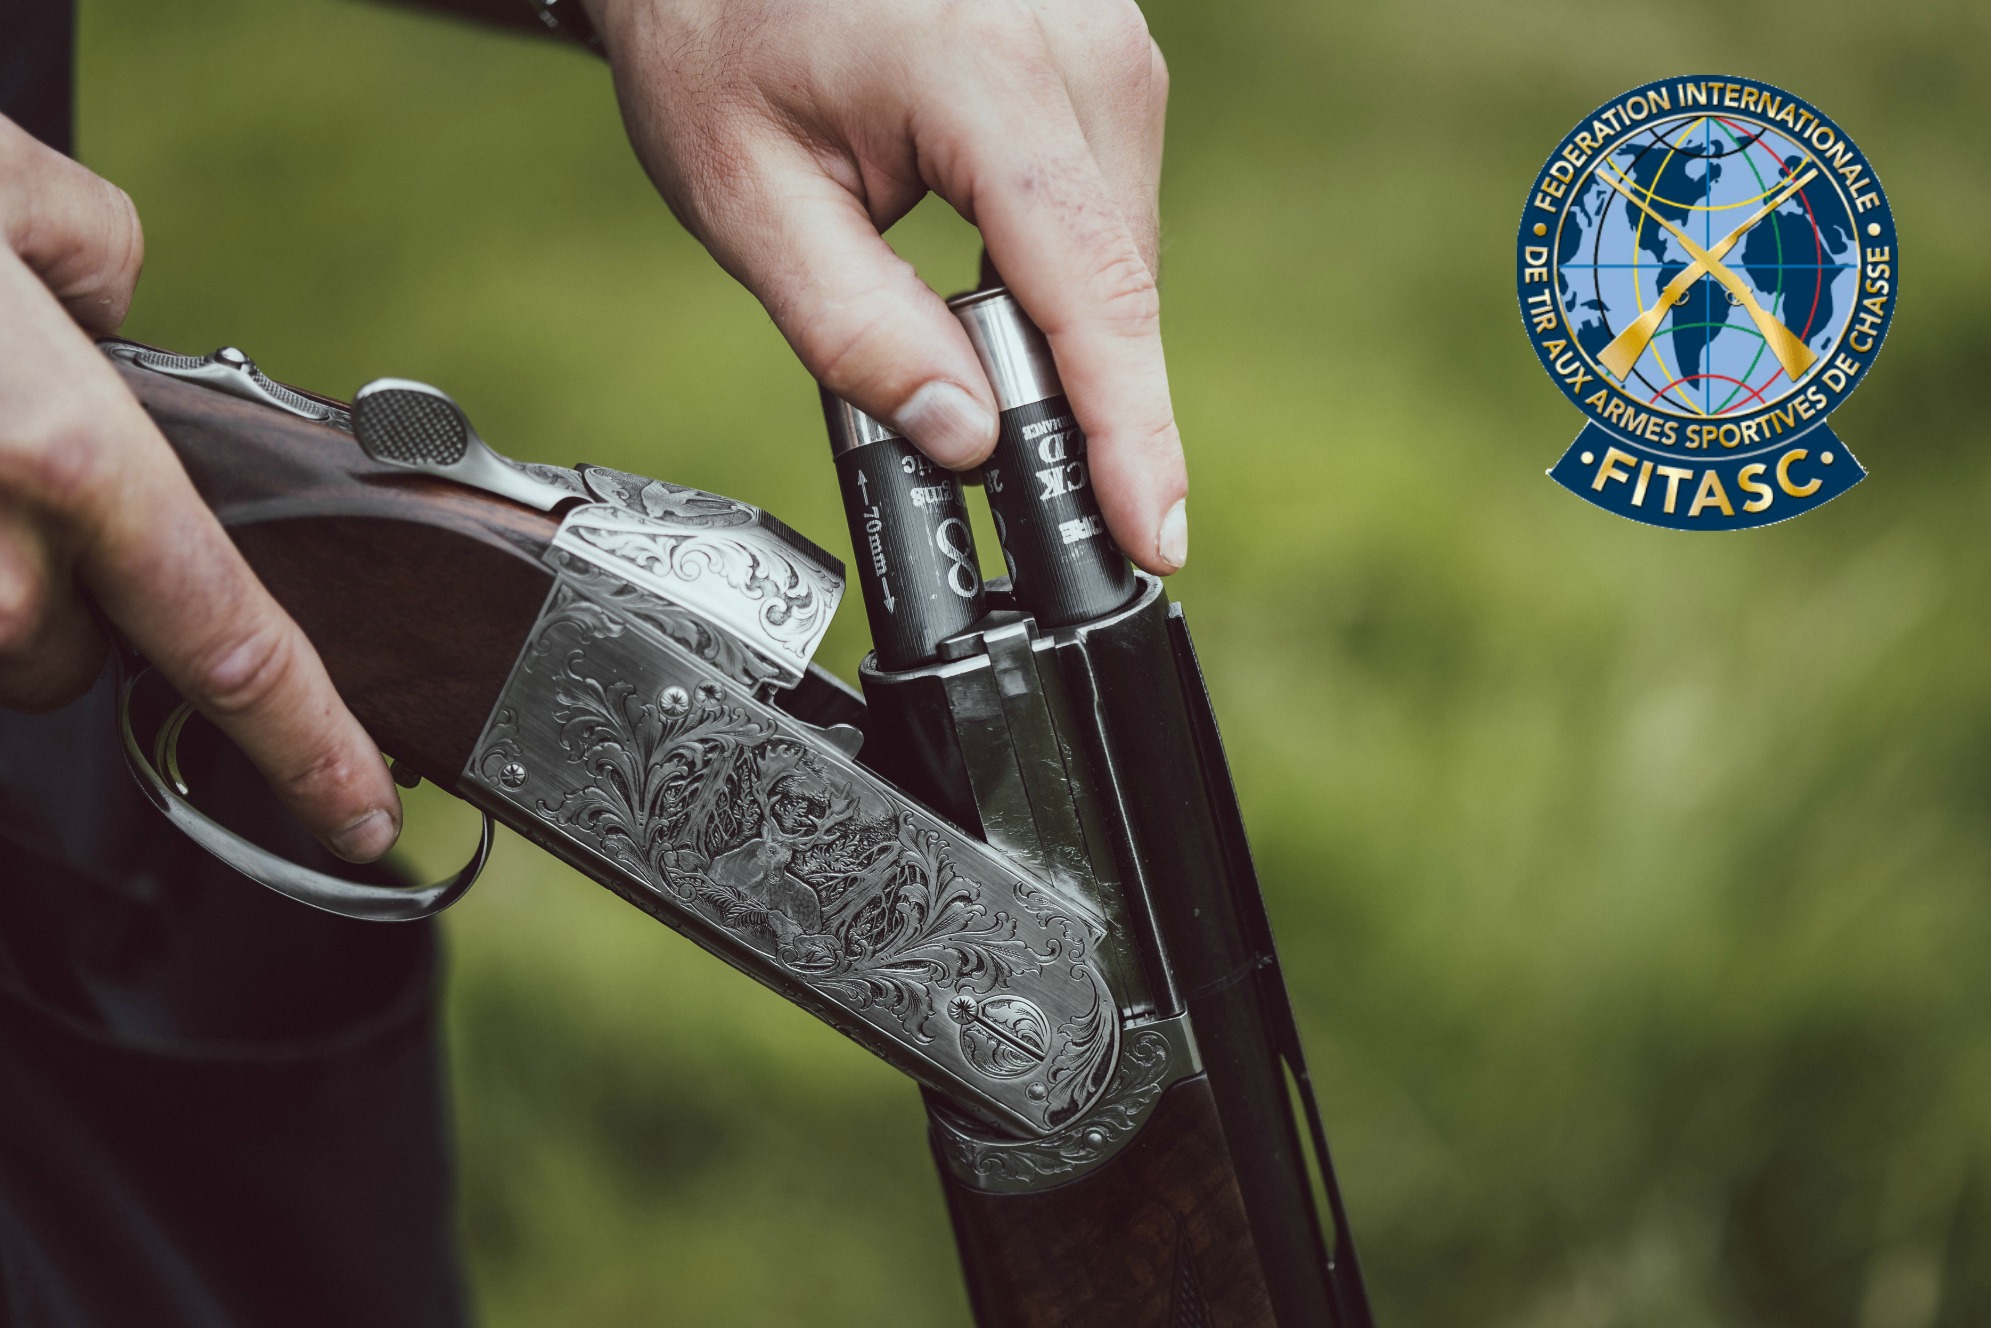 Gamebore proudly support the 2019 World FITASC Championship taking